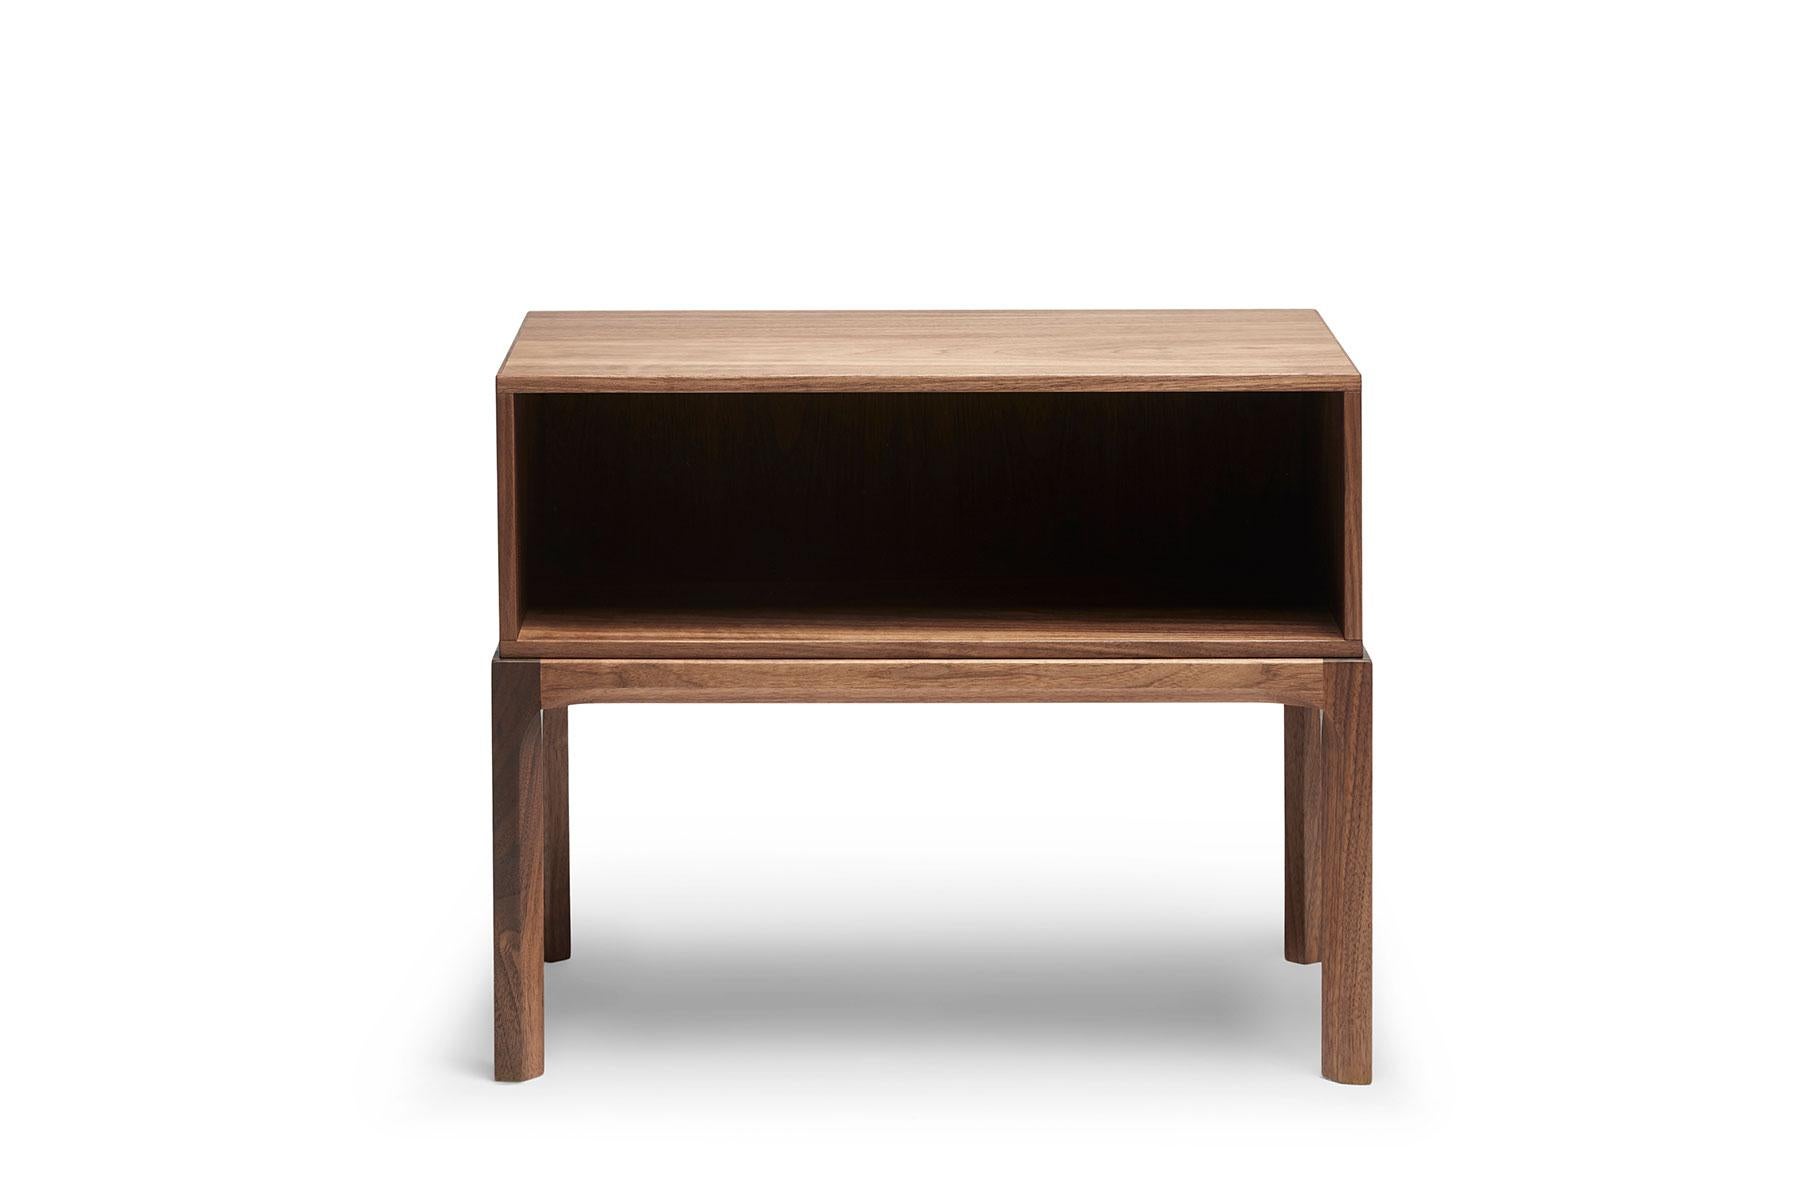 Originally designed by Kai Kristiansen for Axel Kjersgaard in the 1960s. This piece is hand built at Getama's factory in Gedsted, Denmark by skilled cabinetmakers using traditional Scandinavian techniques.